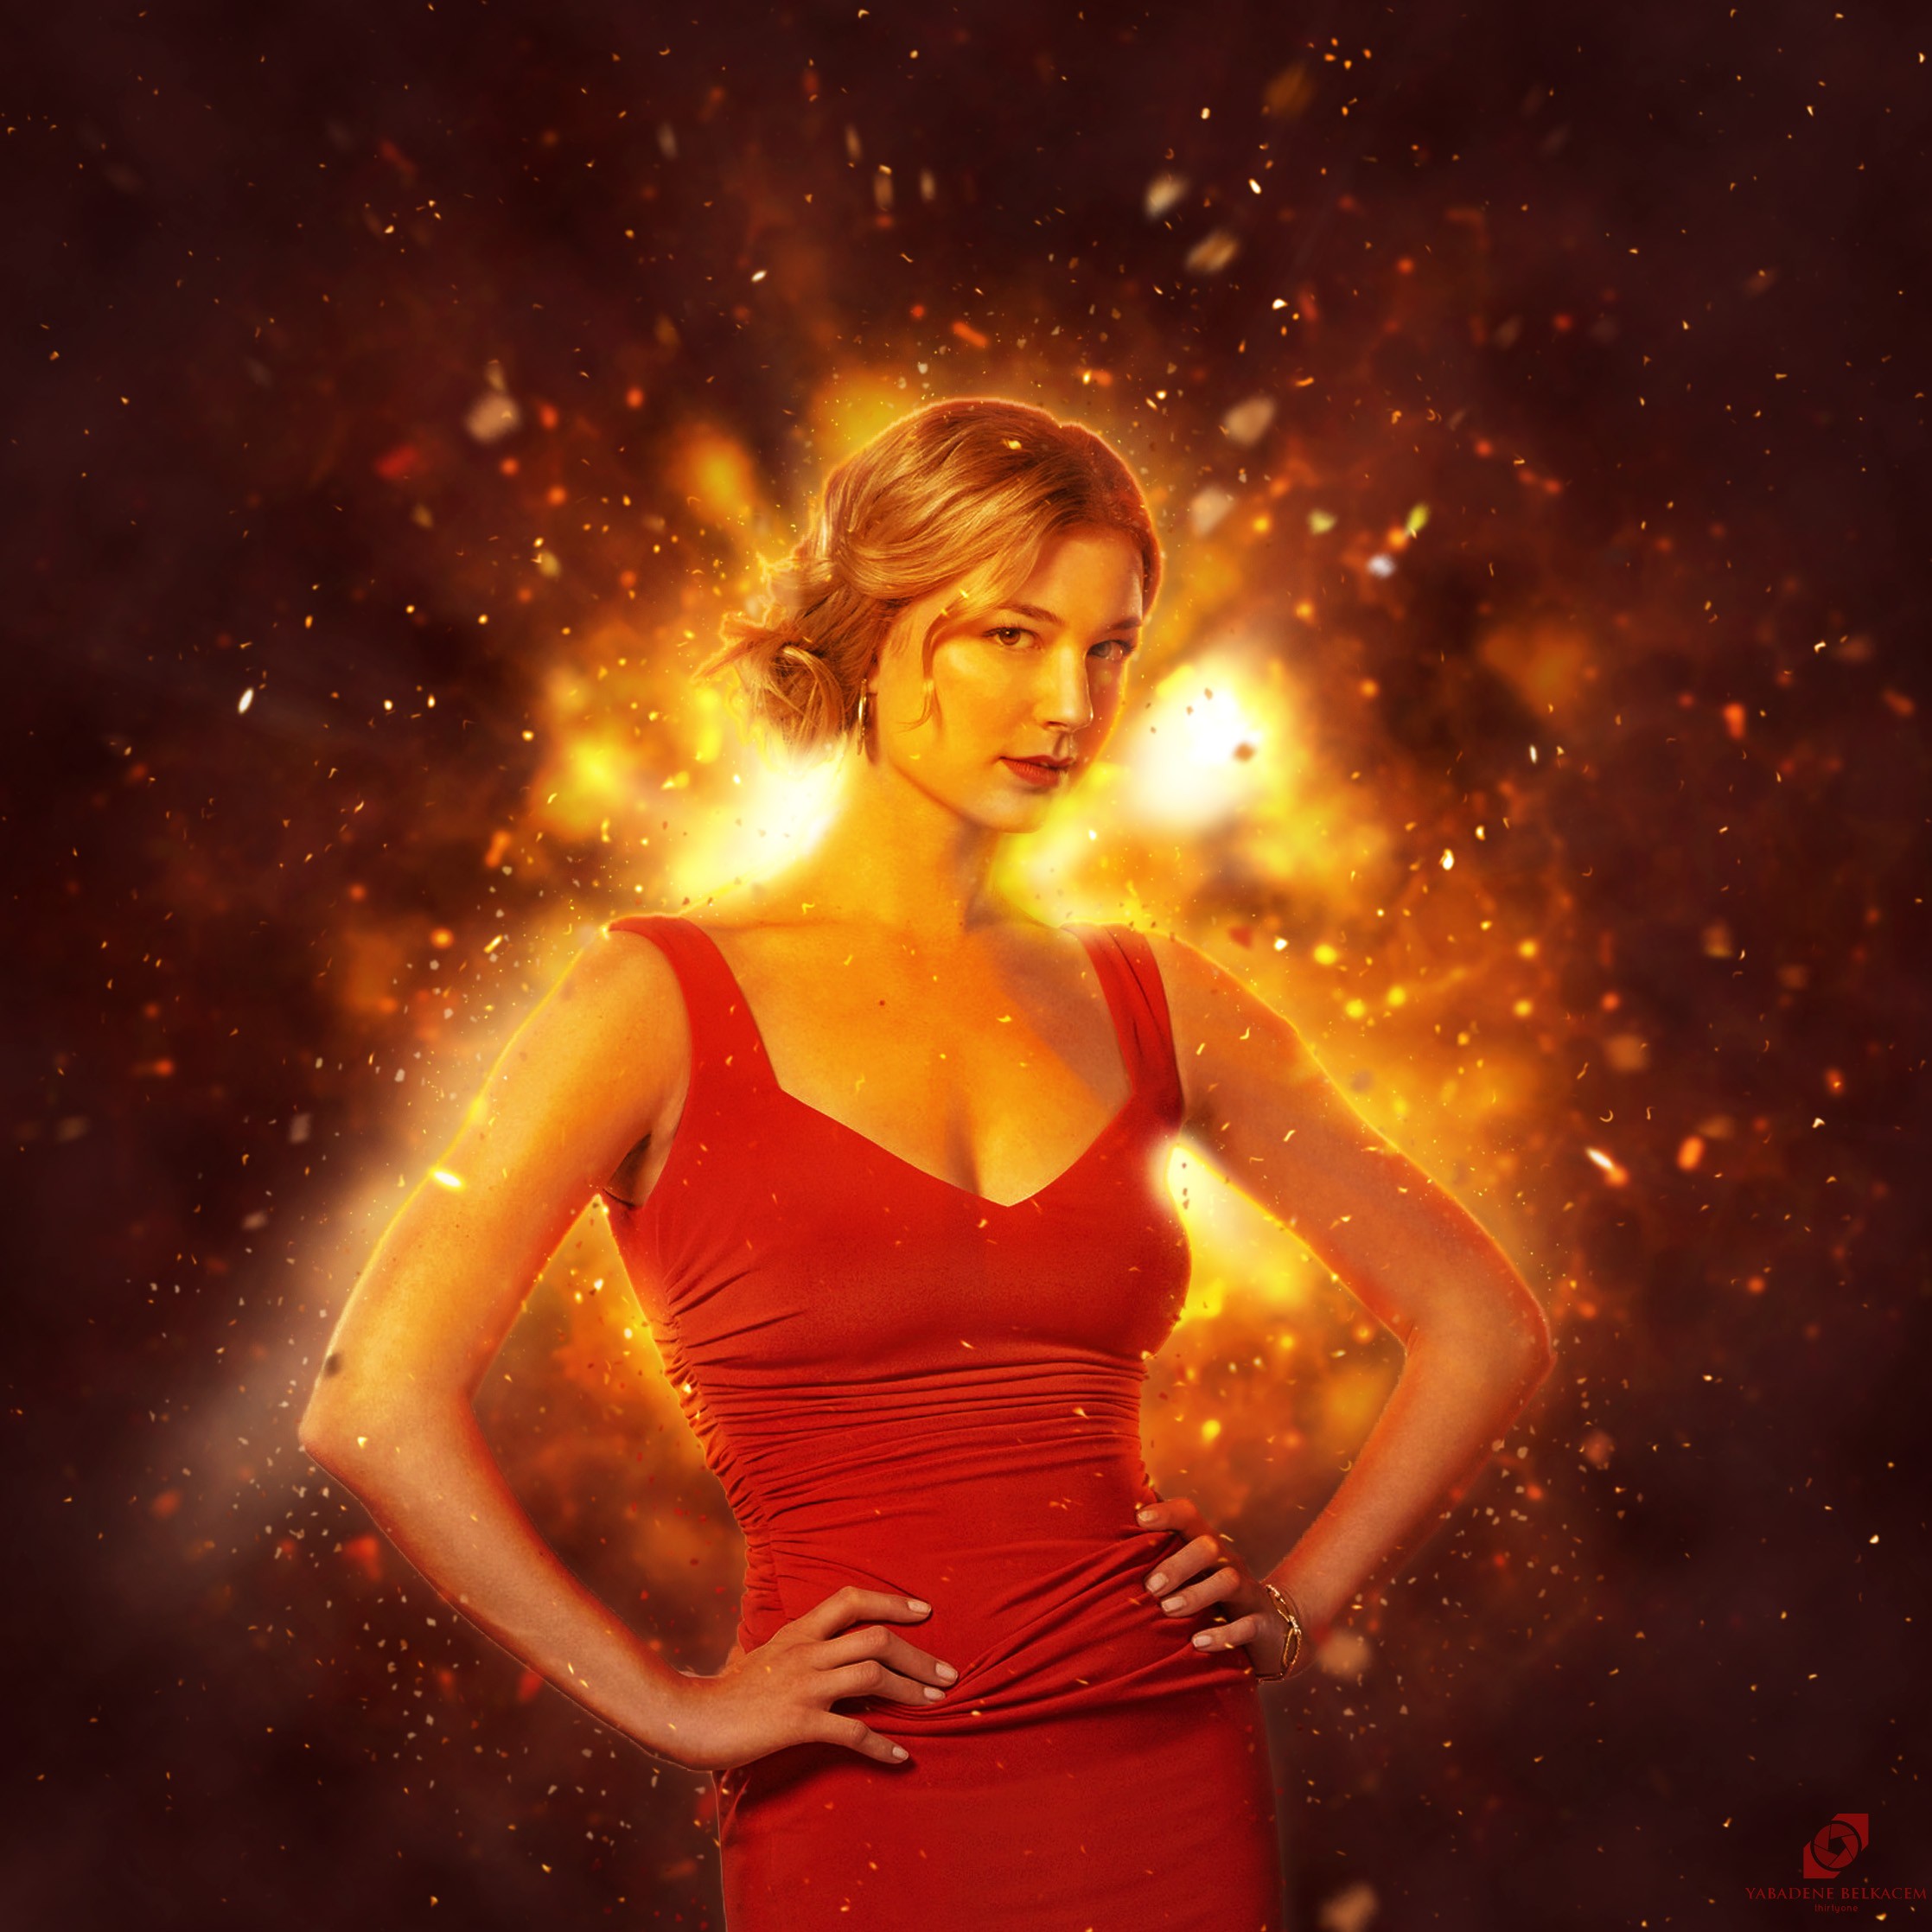 People 2235x2235 Emily Vancamp Hollywood women portrait red movies red dress dress red clothing looking at viewer Canadian women actress photo manipulation watermarked Yabadene Belkacem portrait display